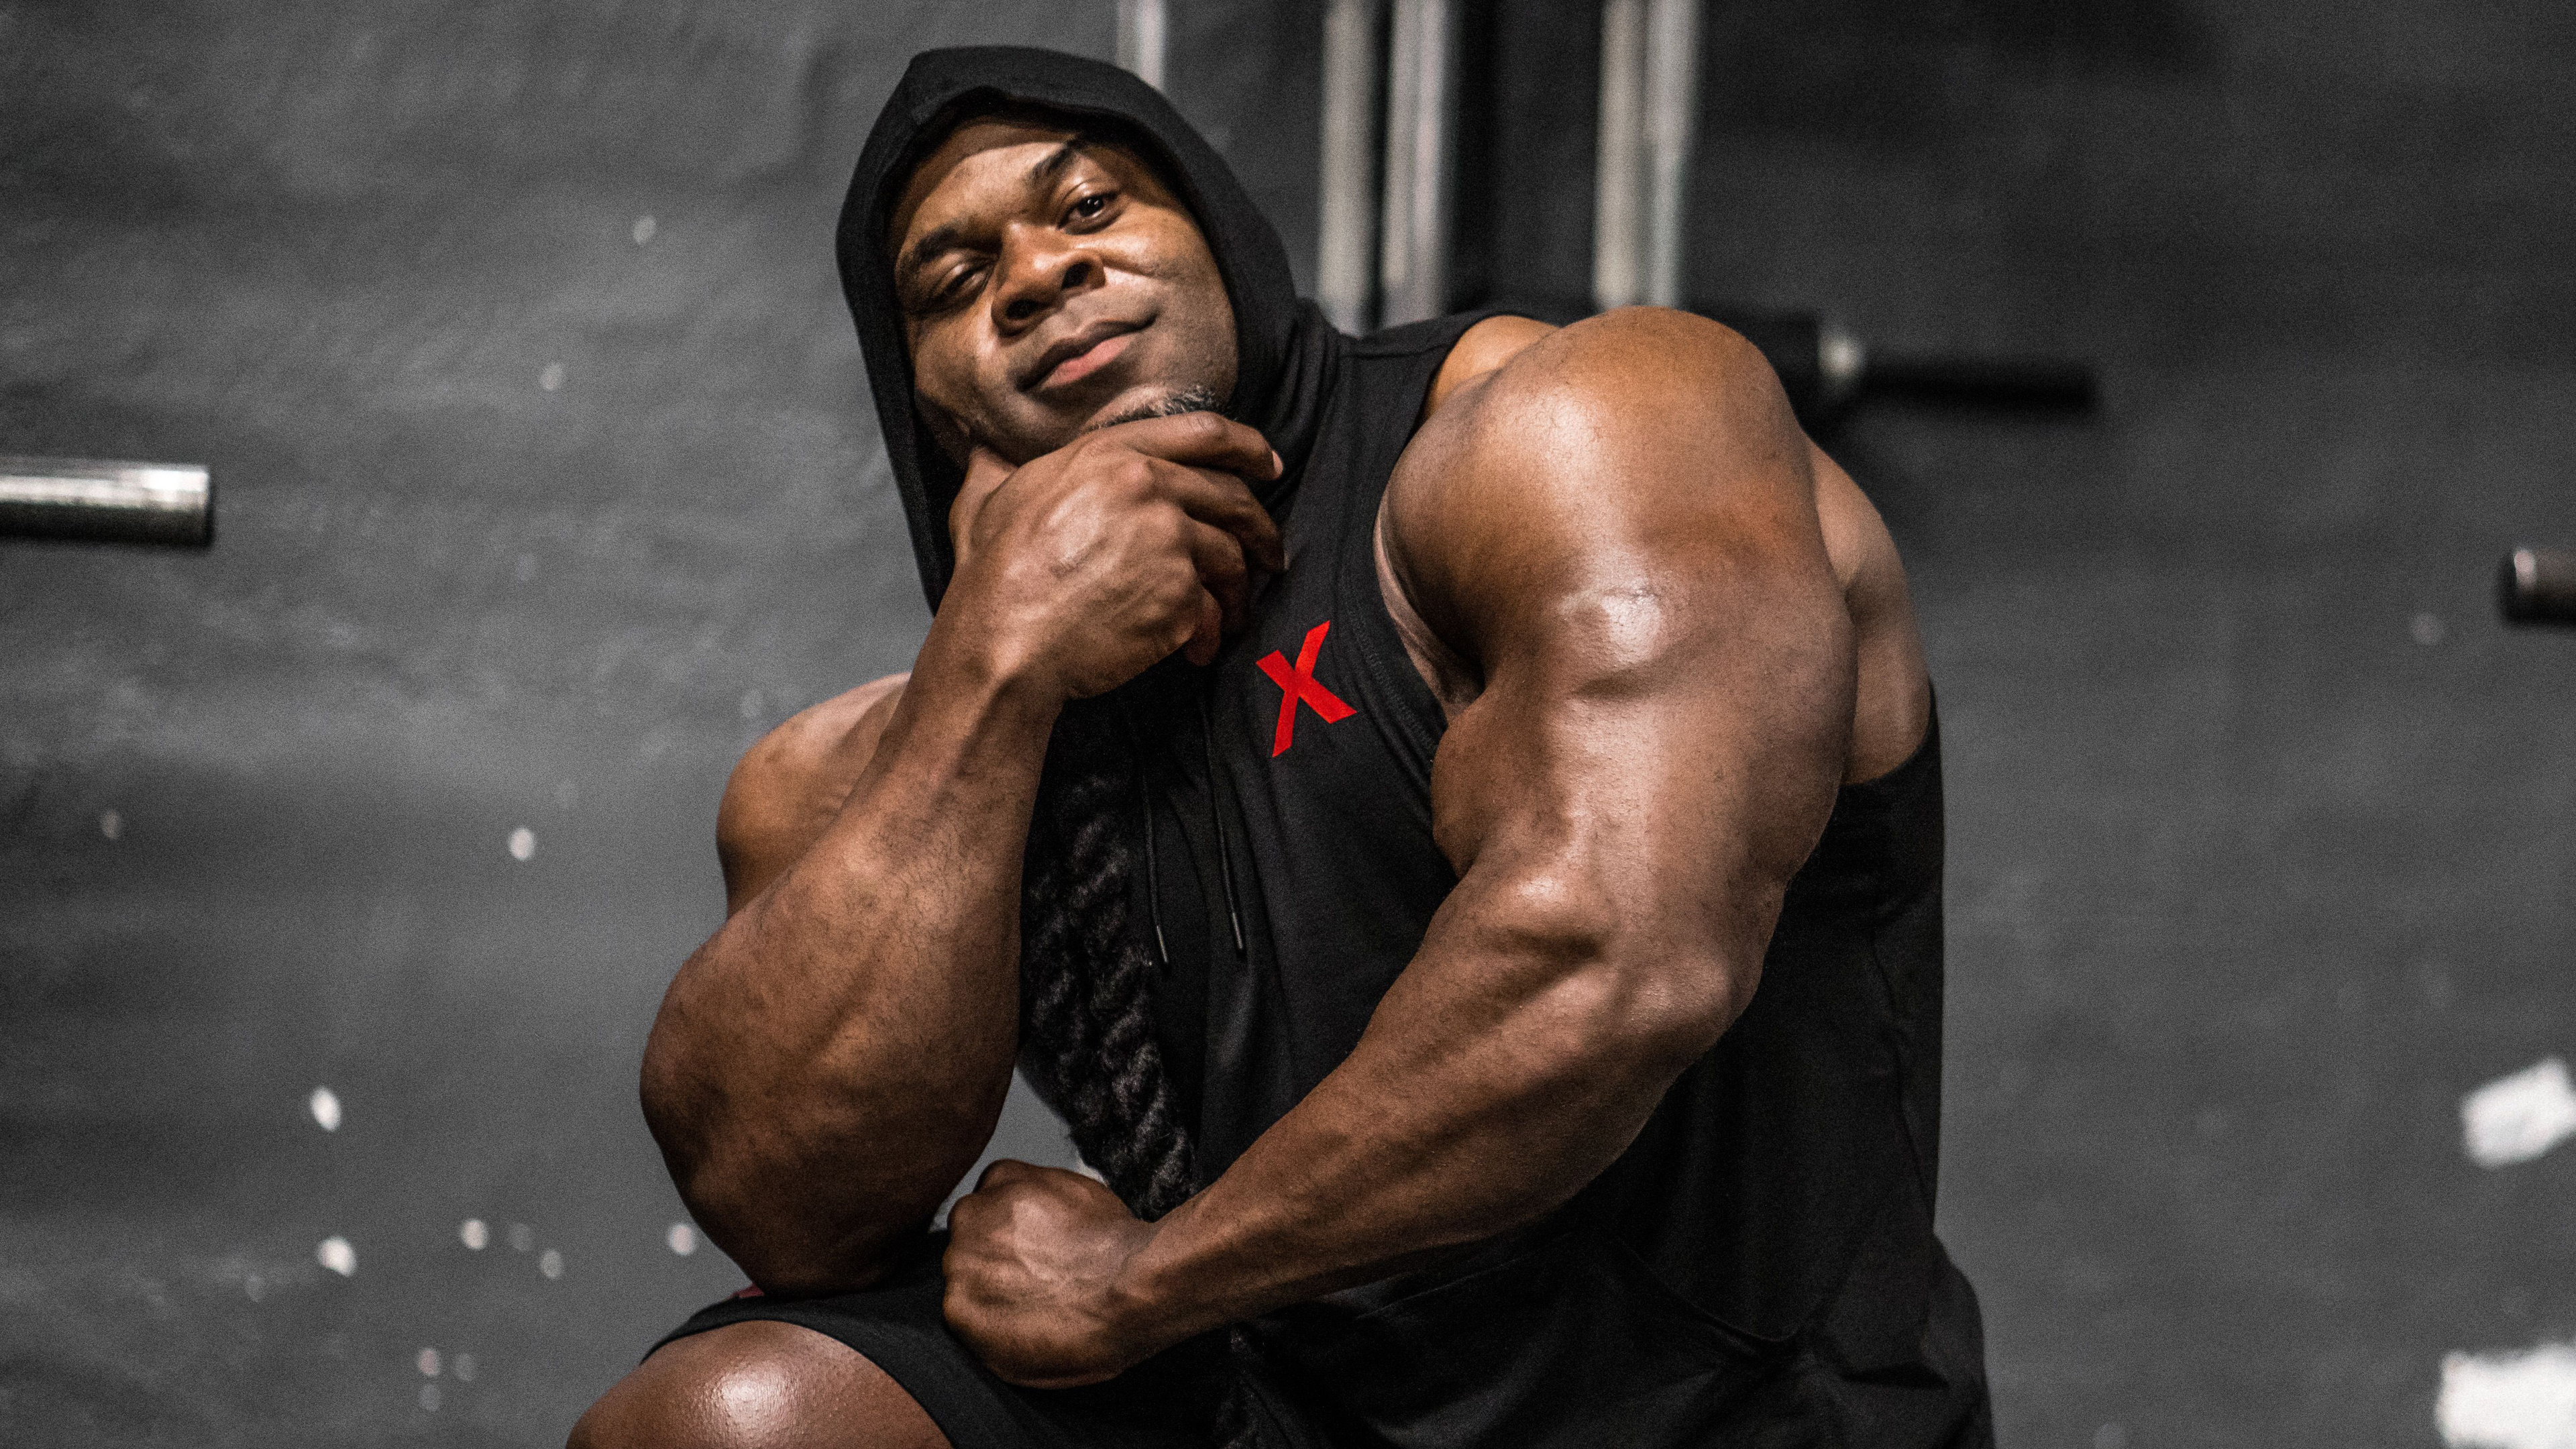 Bodybuilding: Kai Greene, The practice of lifting weights to develop a beautiful body. 3840x2160 4K Background.